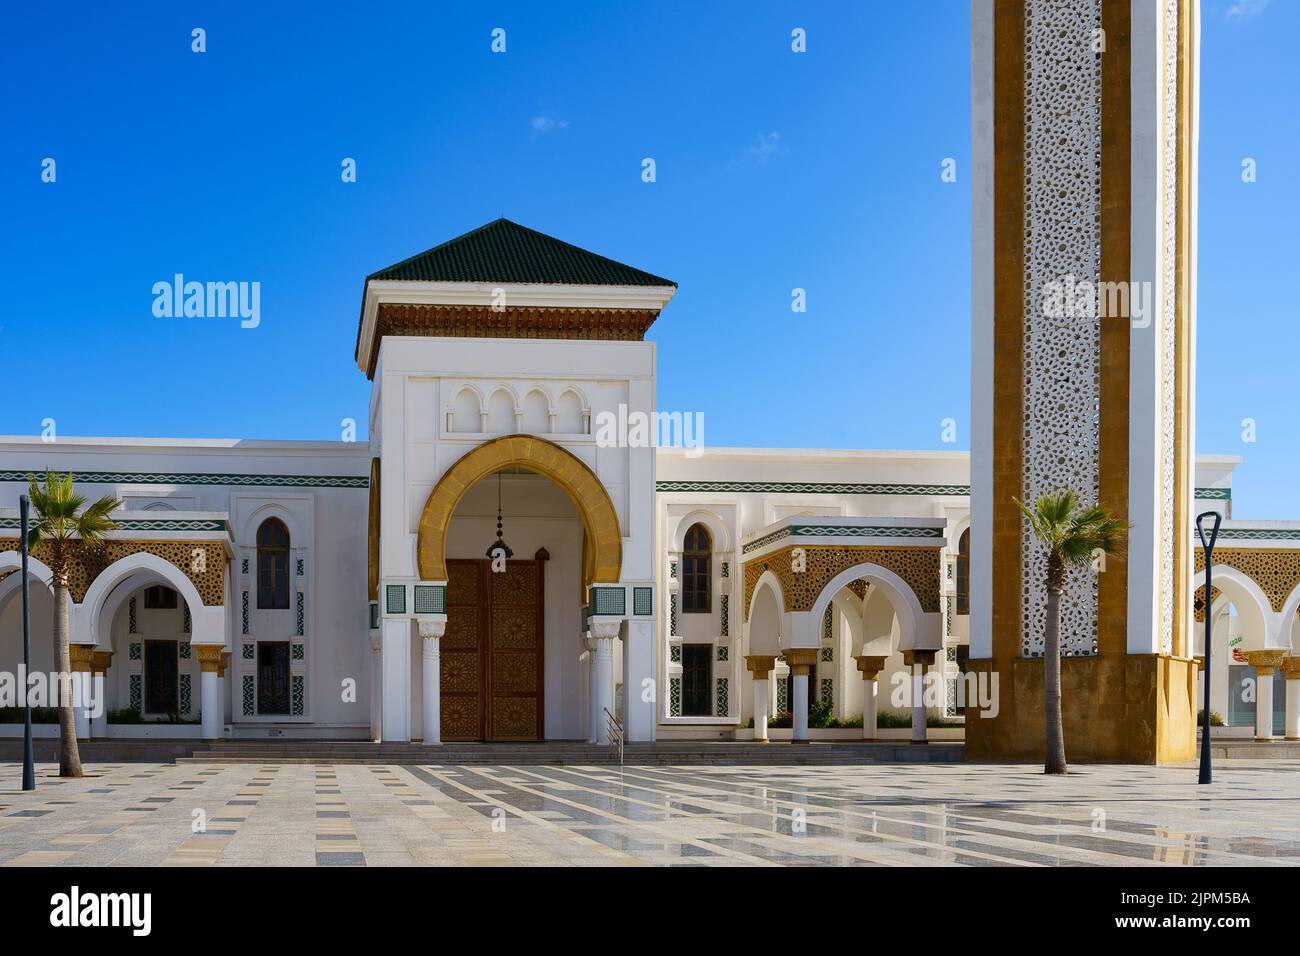 An aerial view of Masjid Al-Mina mosque under blue bright sky in Tangier Stock Photo